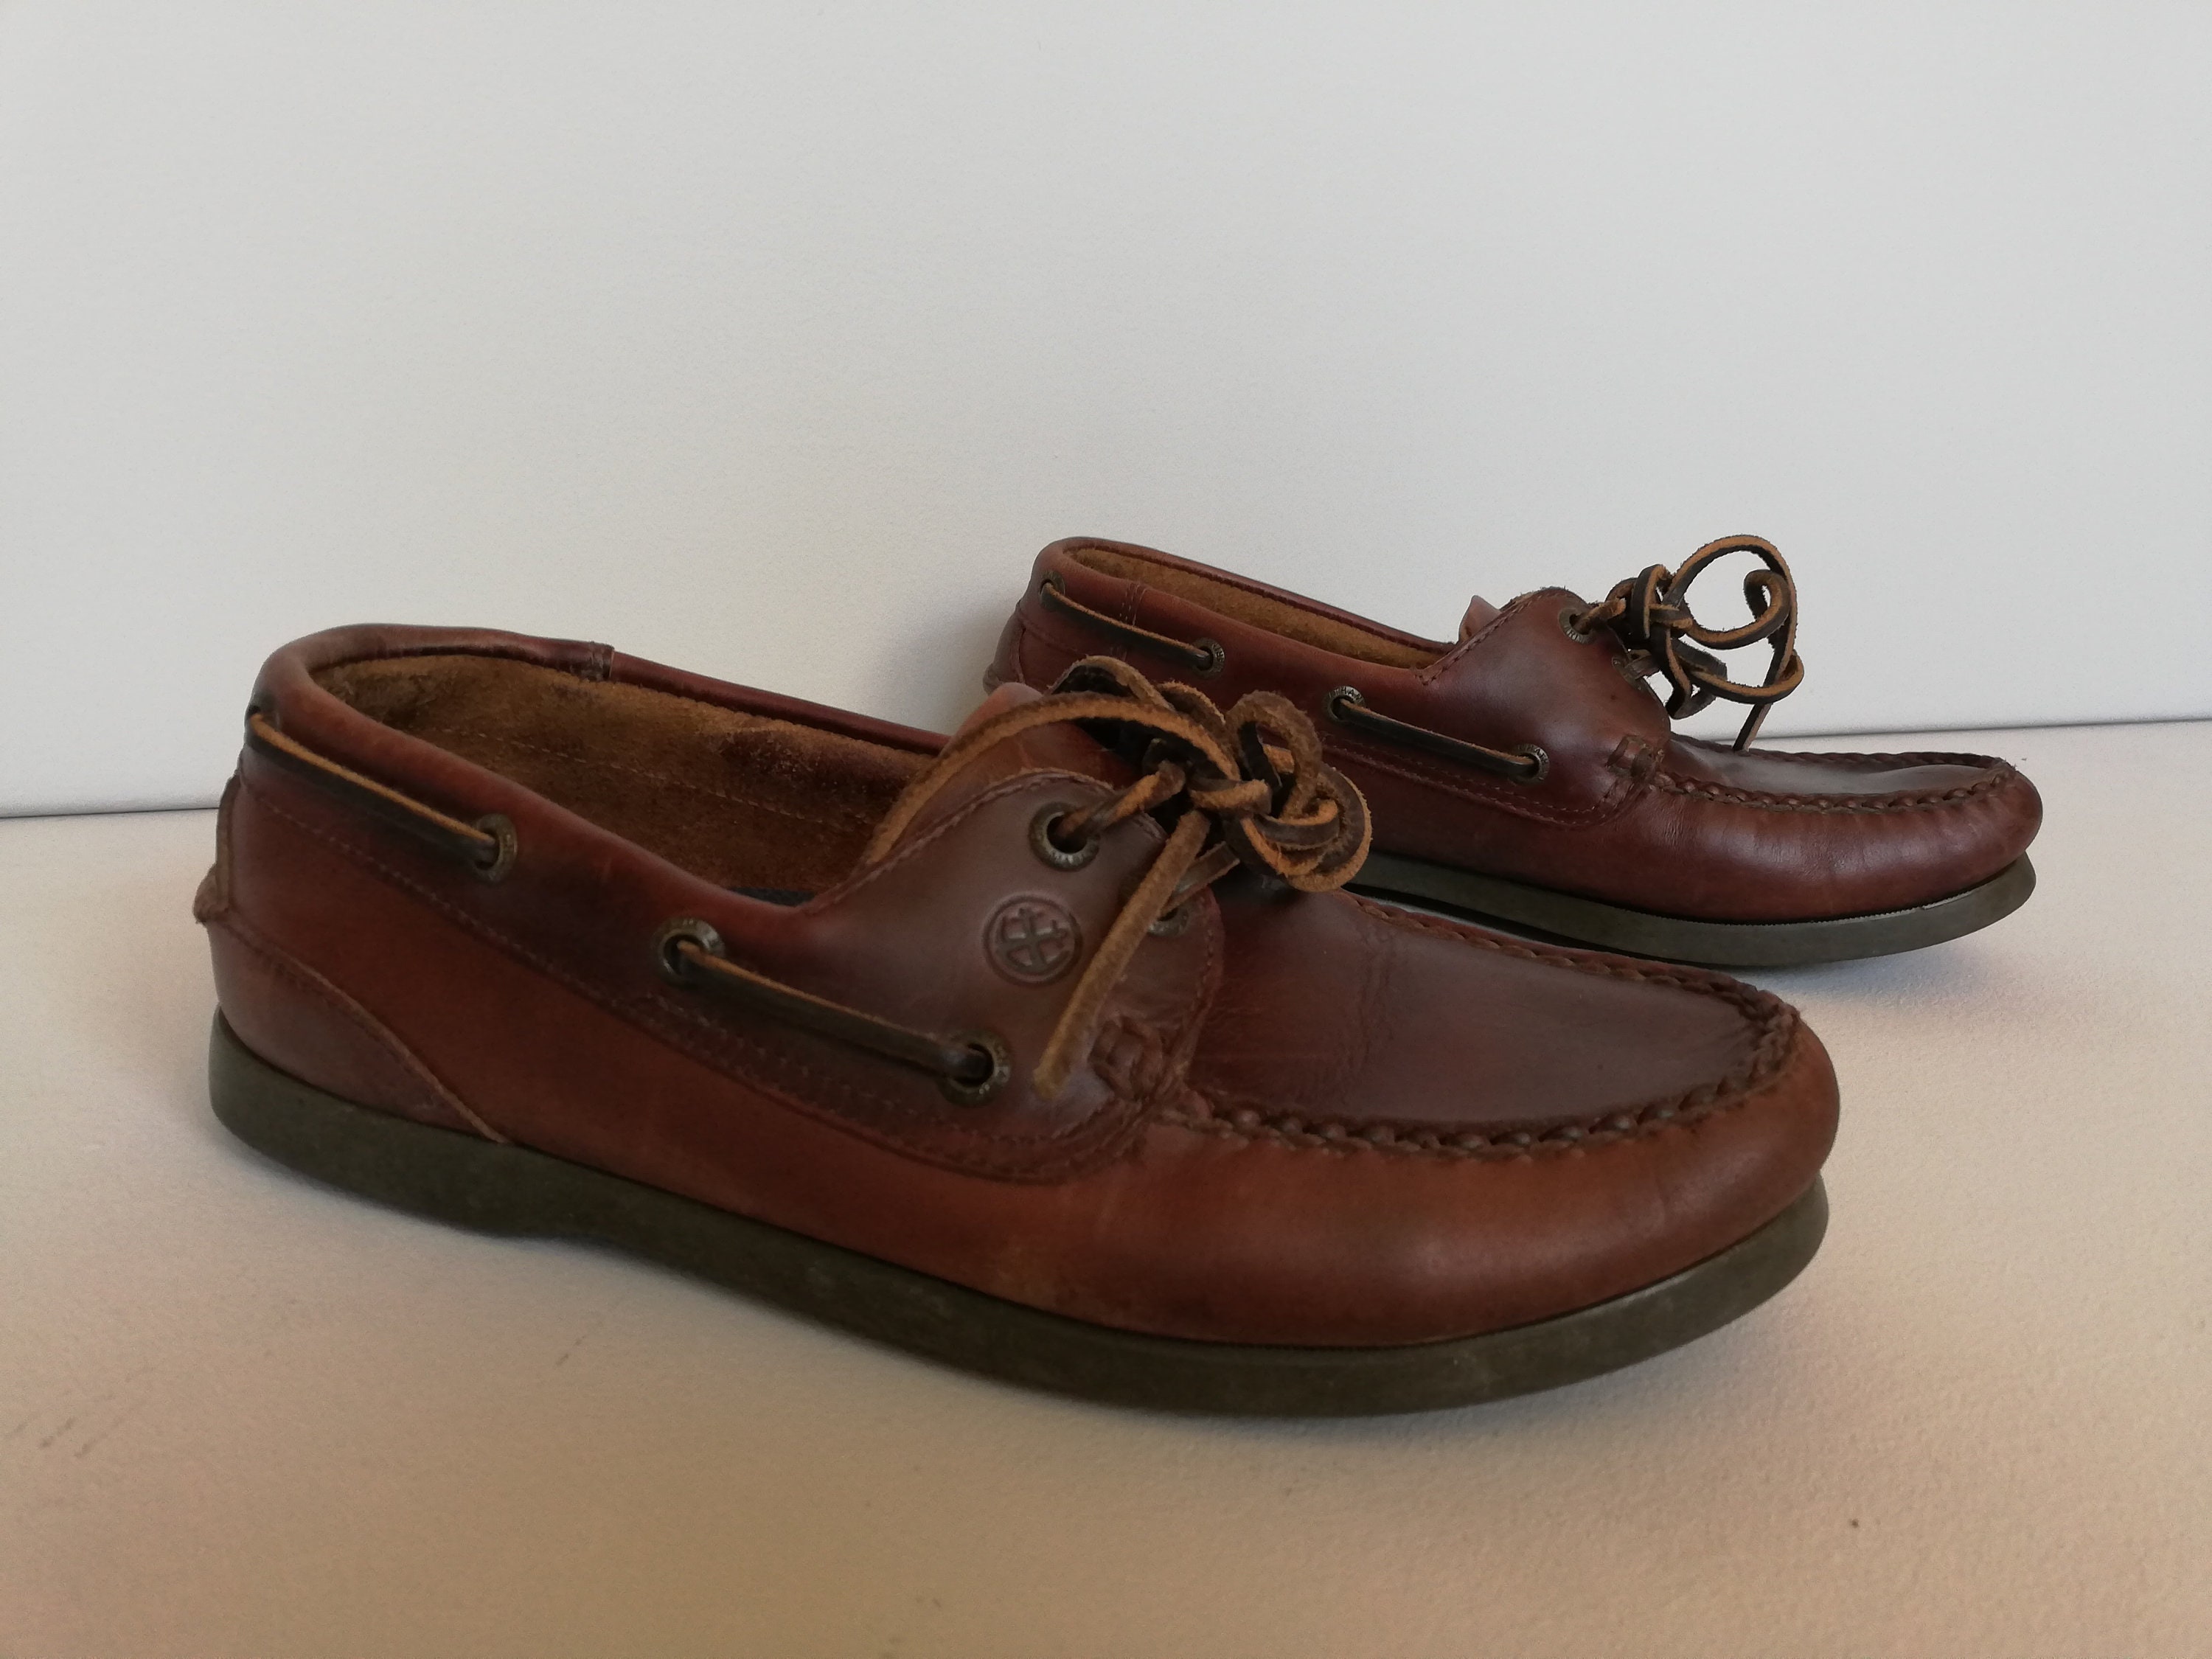 Chatham Deck Shoes. Boat Shoes 2 Eye Men's Leather Shoes. - Etsy